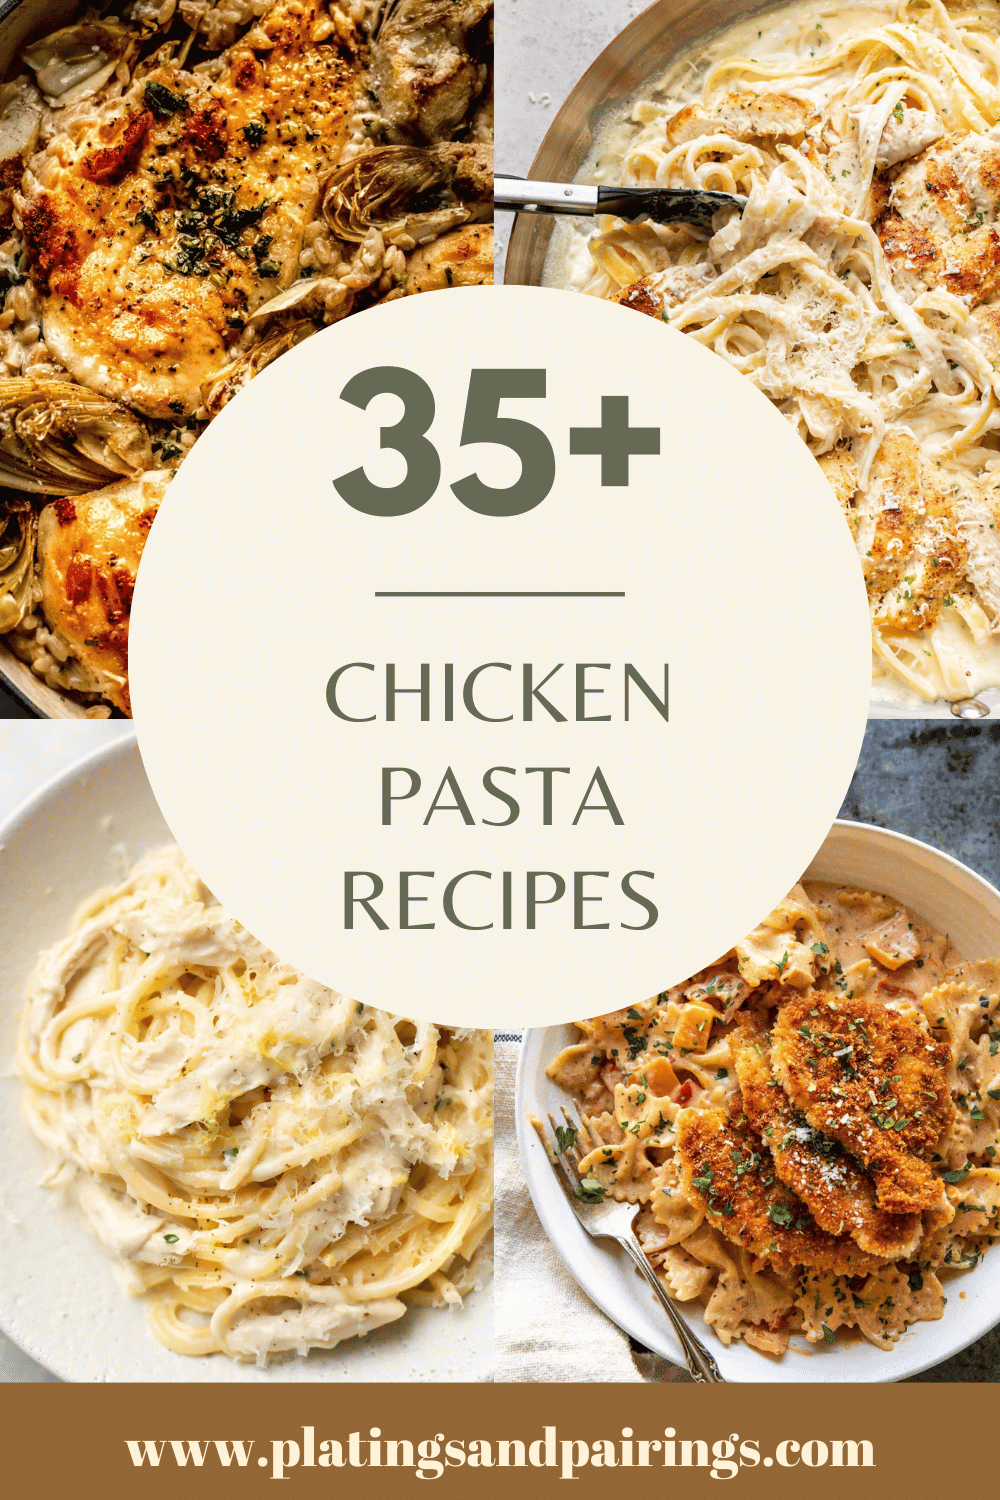 Collage of chicken pasta recipes with text overlay.